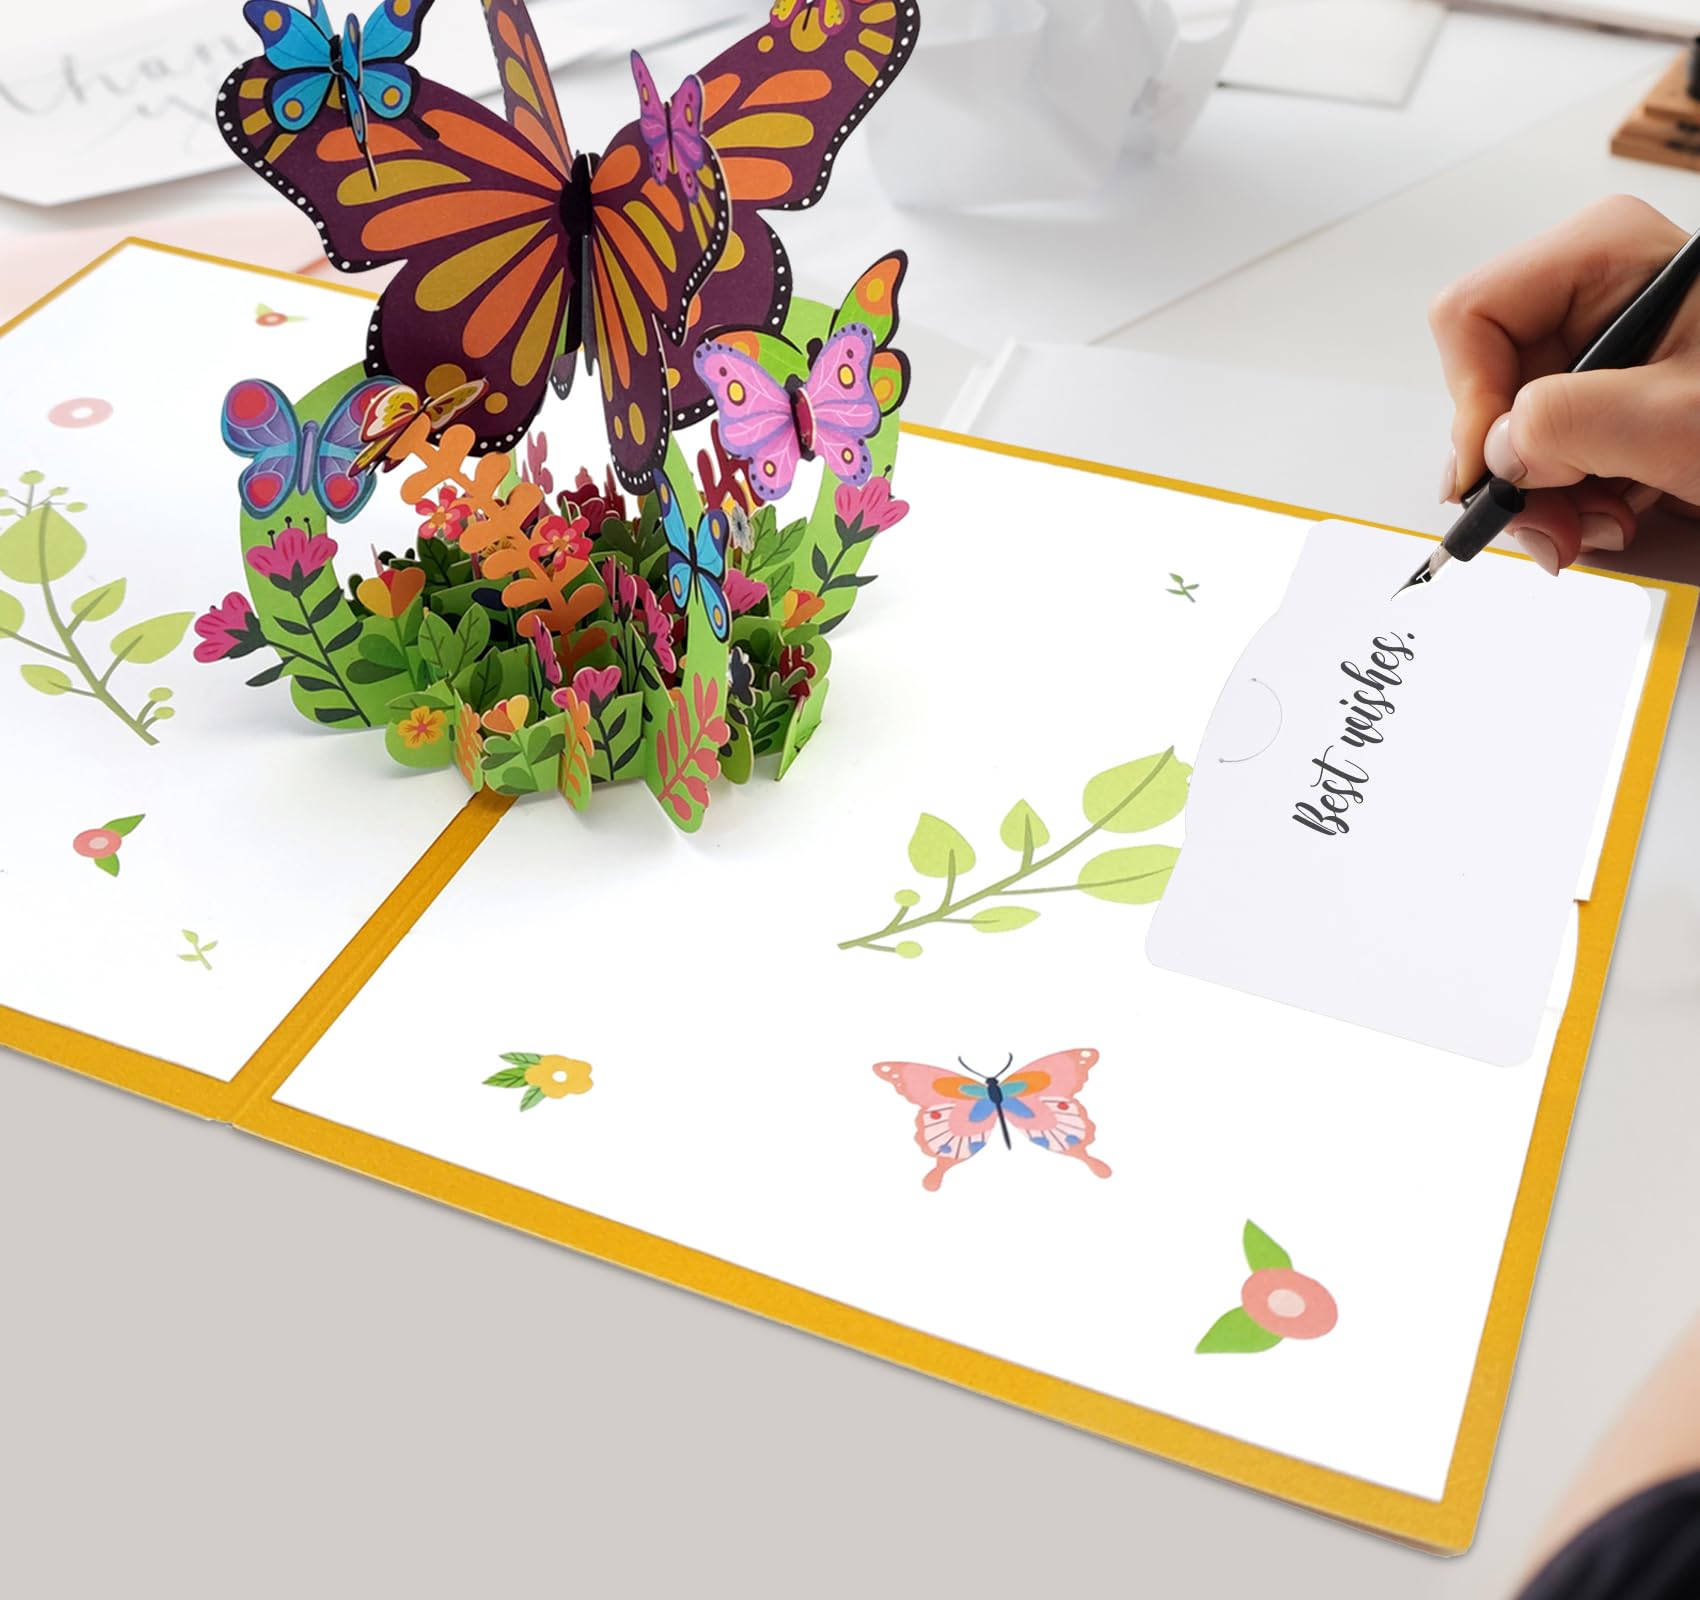 Agoer Pop Up Card Greeting Cards,Mothers Day Pop Up Butterfly Flowers Card with Blank Envelope for Wife,Girlfriend & Mother,3D Flower Card for Birthday Anniversary Teacher Thank You Card (Butterfly)